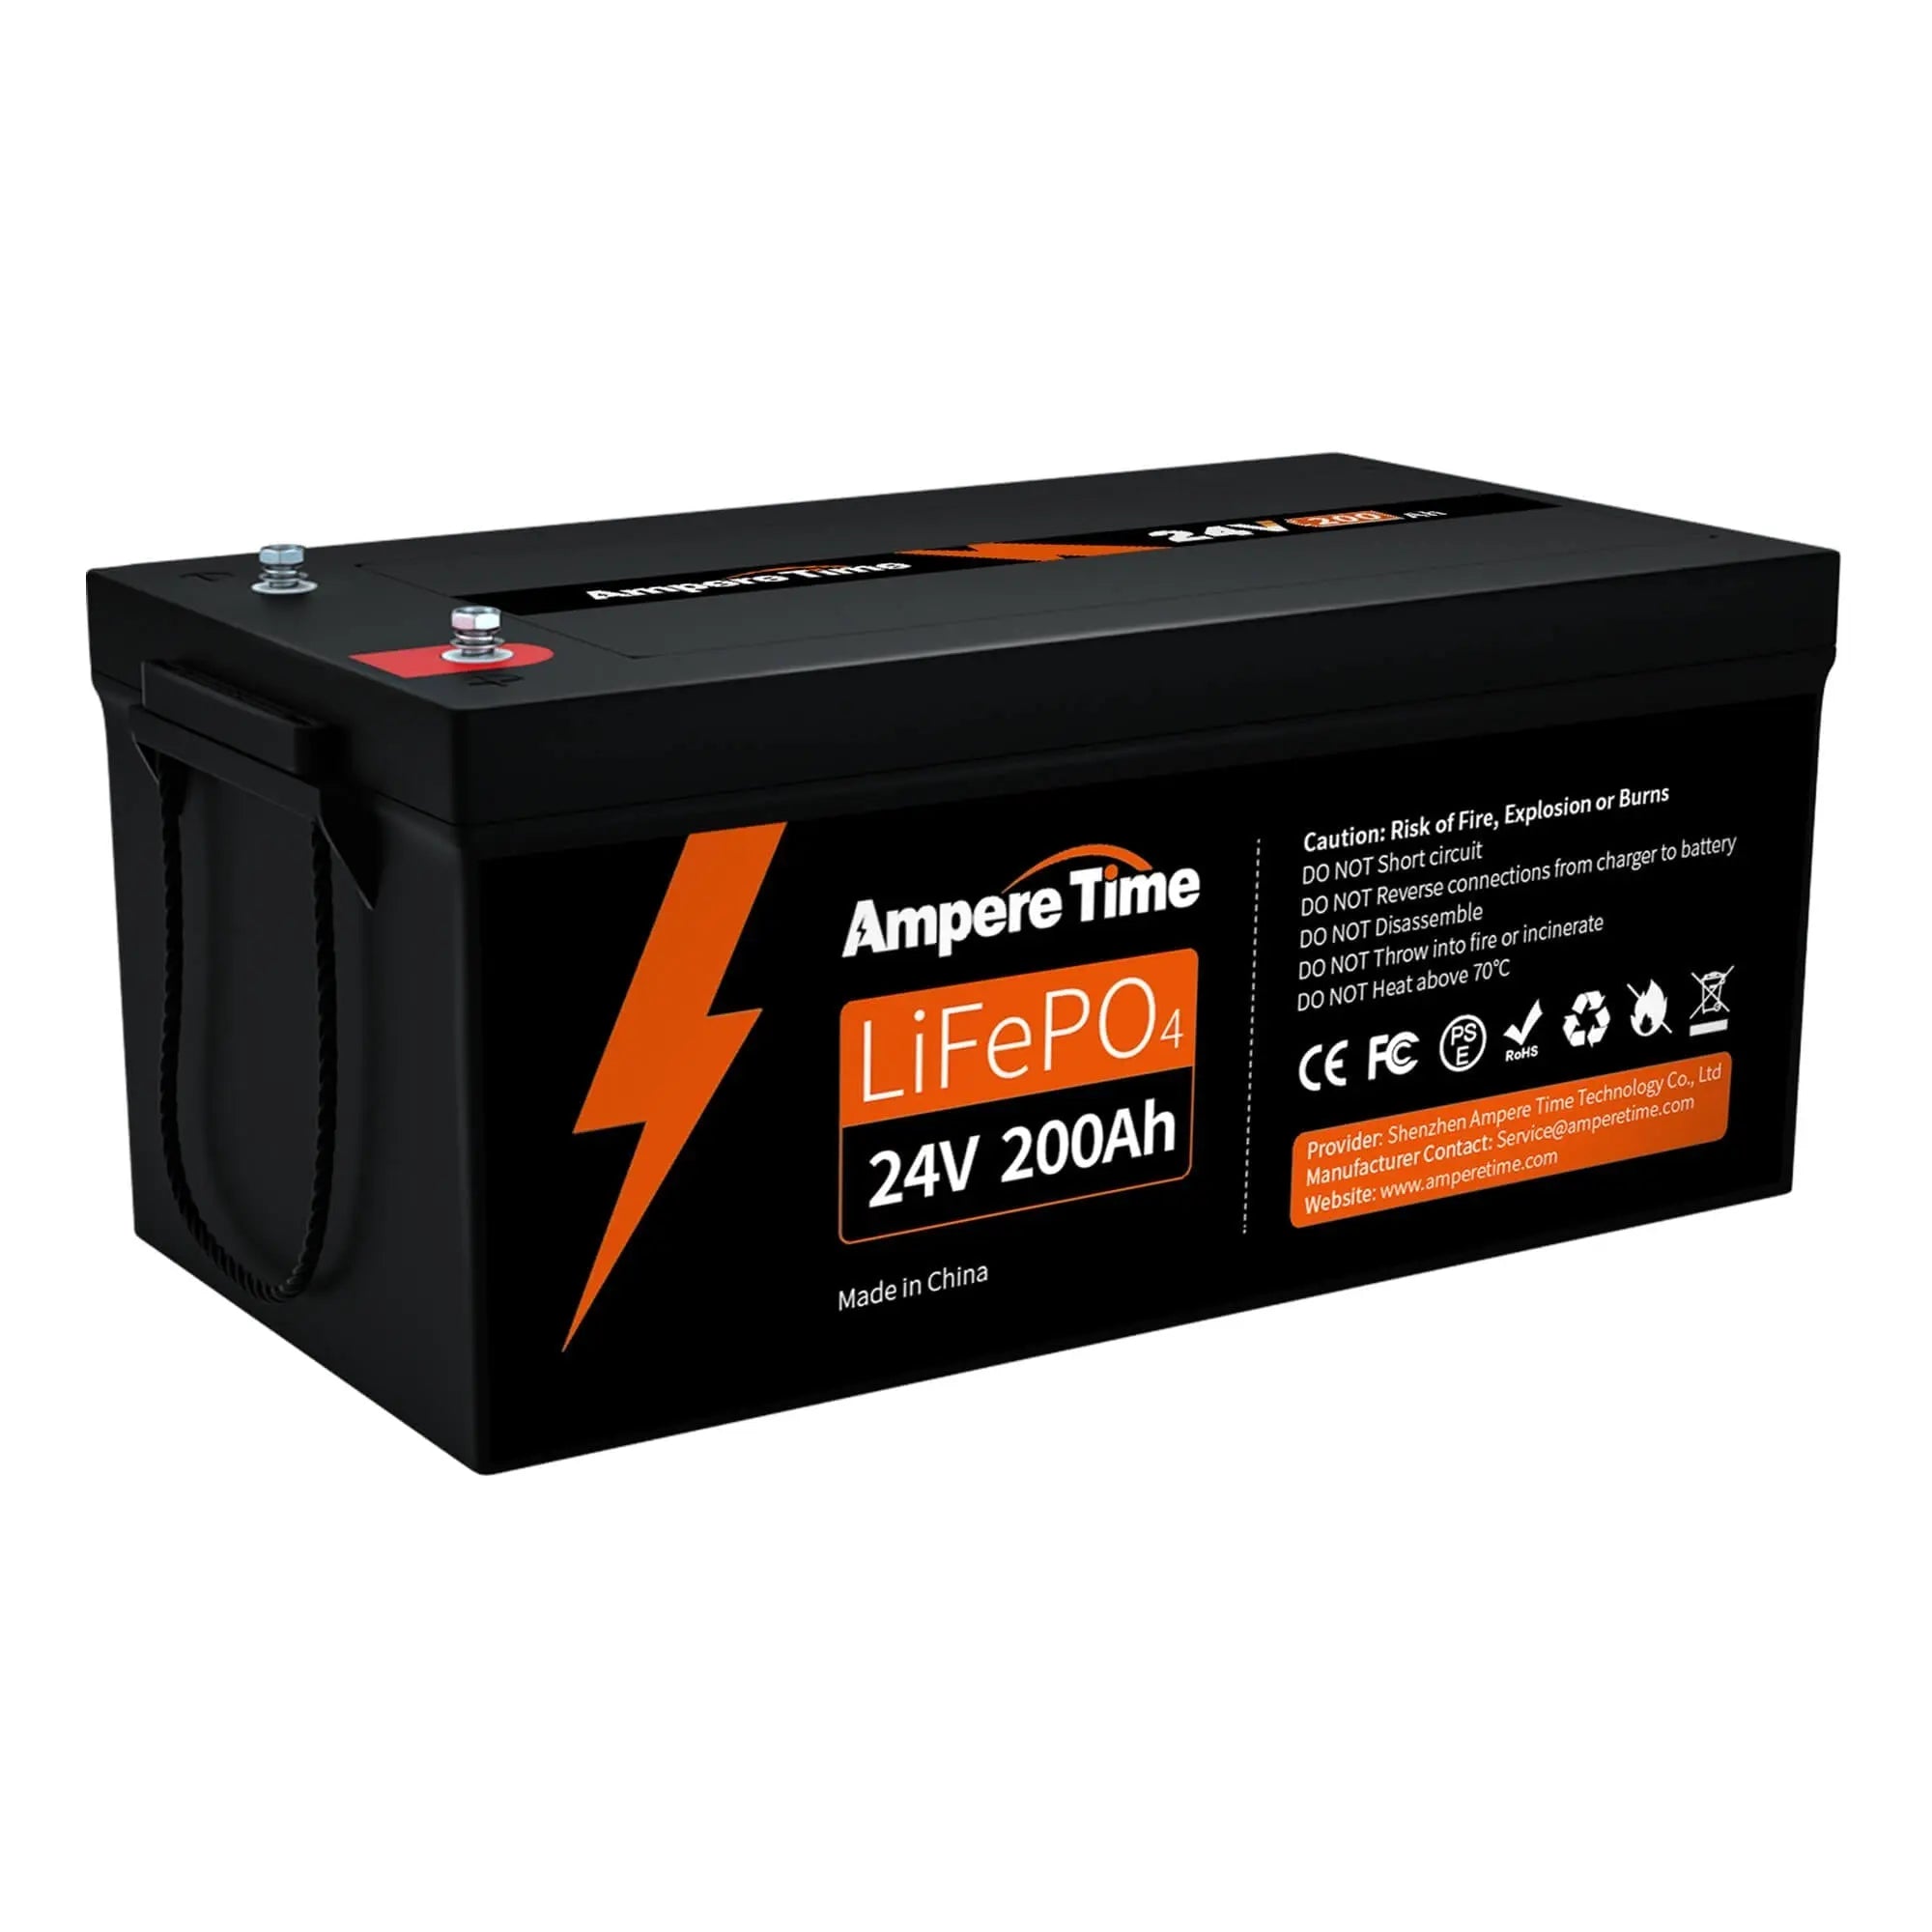 Ampere Time 24V 200Ah, 5120Wh Lithium LiFePO4 Battery with 4000+ Discharge Cycles & Built in 200A BMS Ampere Time